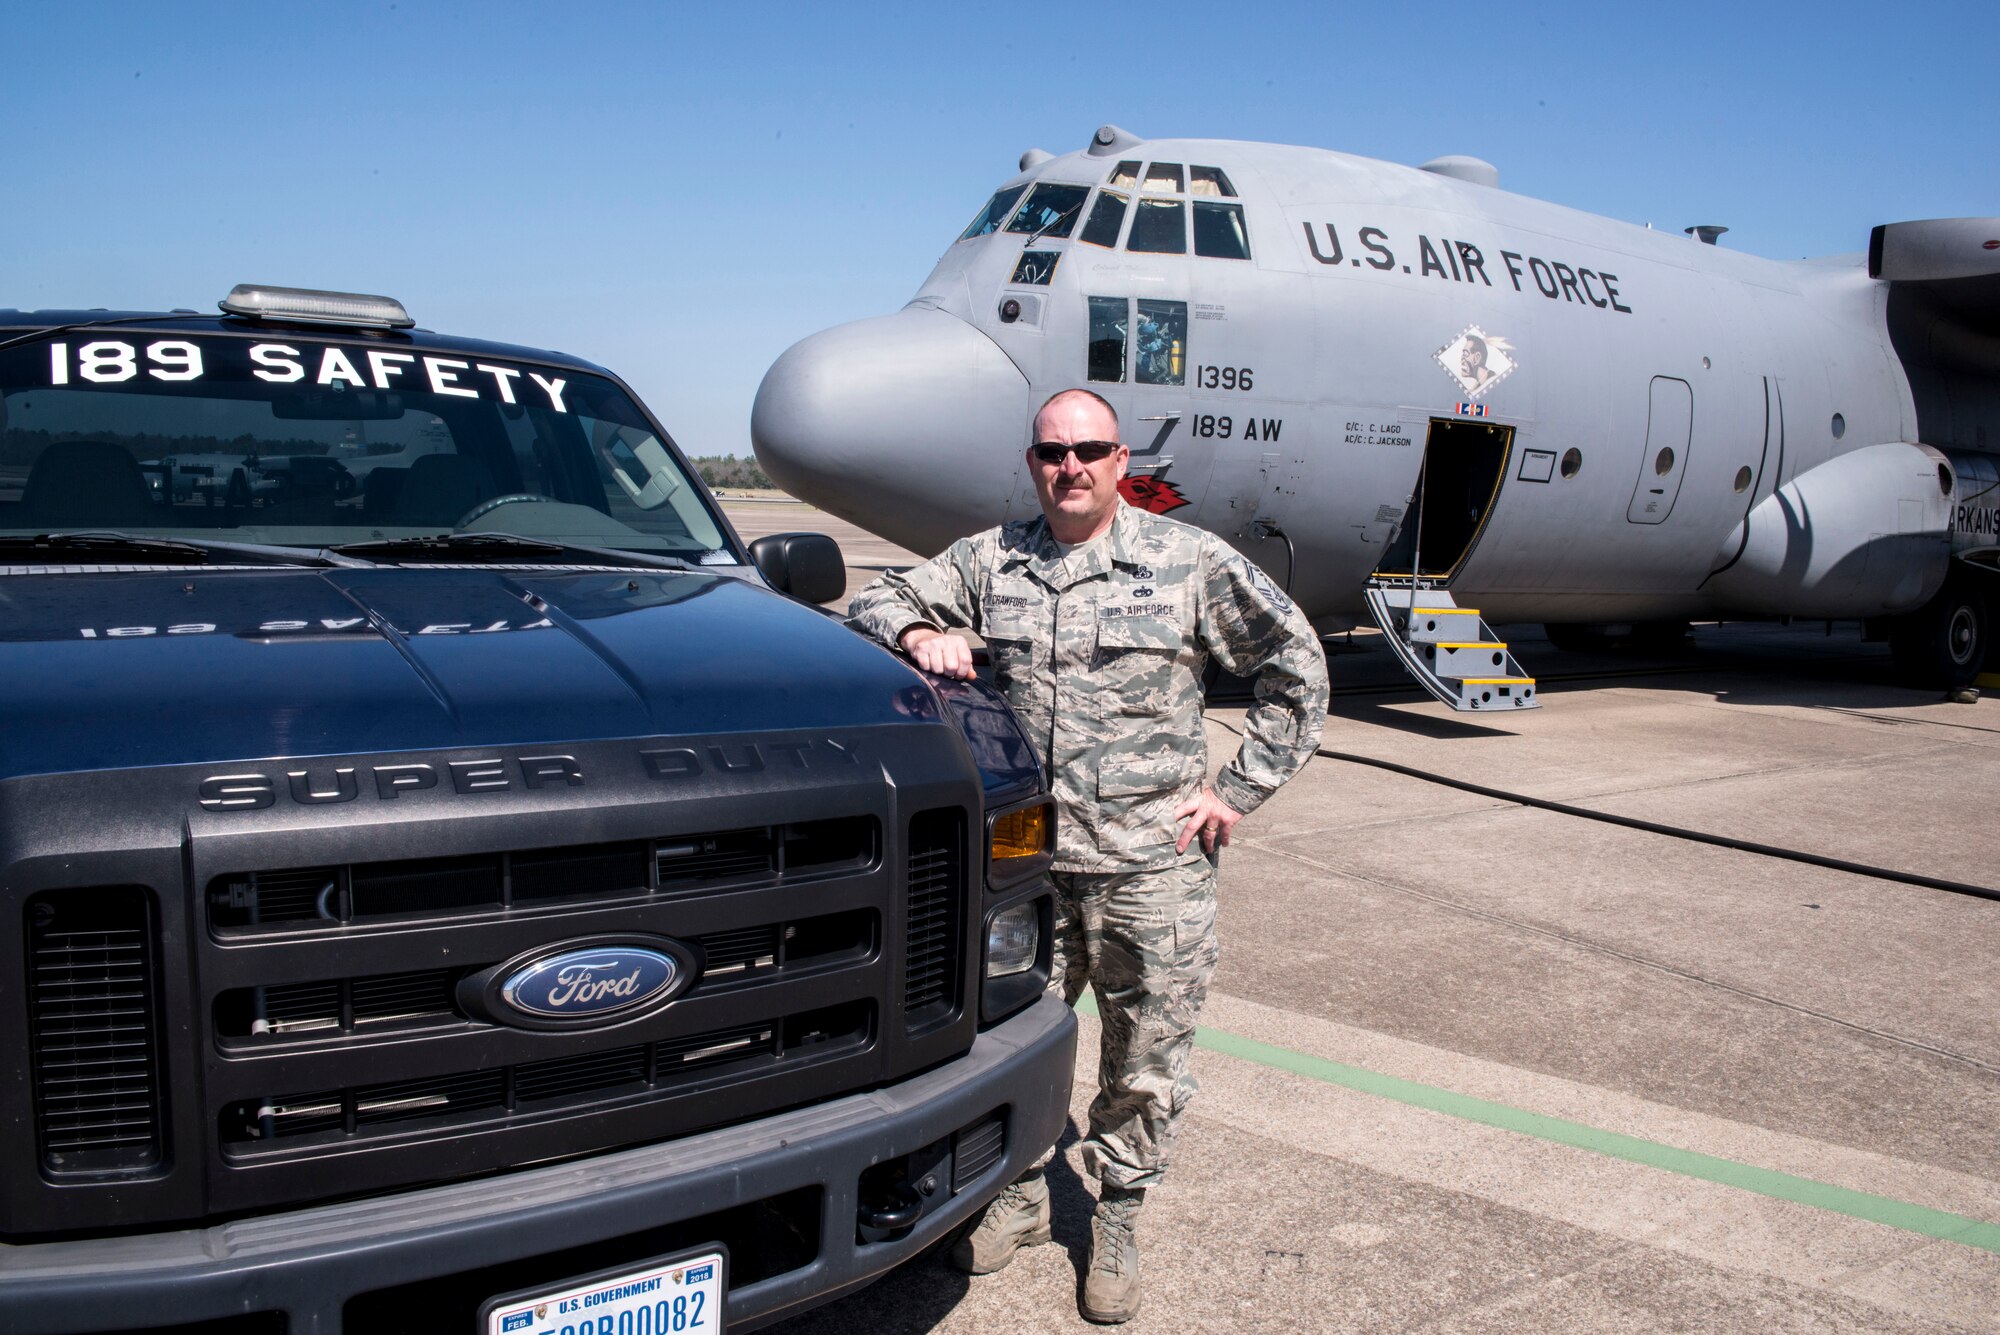 Senior Master Sgt. J.D. Crawford, 189th Airlift Wing Occupational Safety Manager.